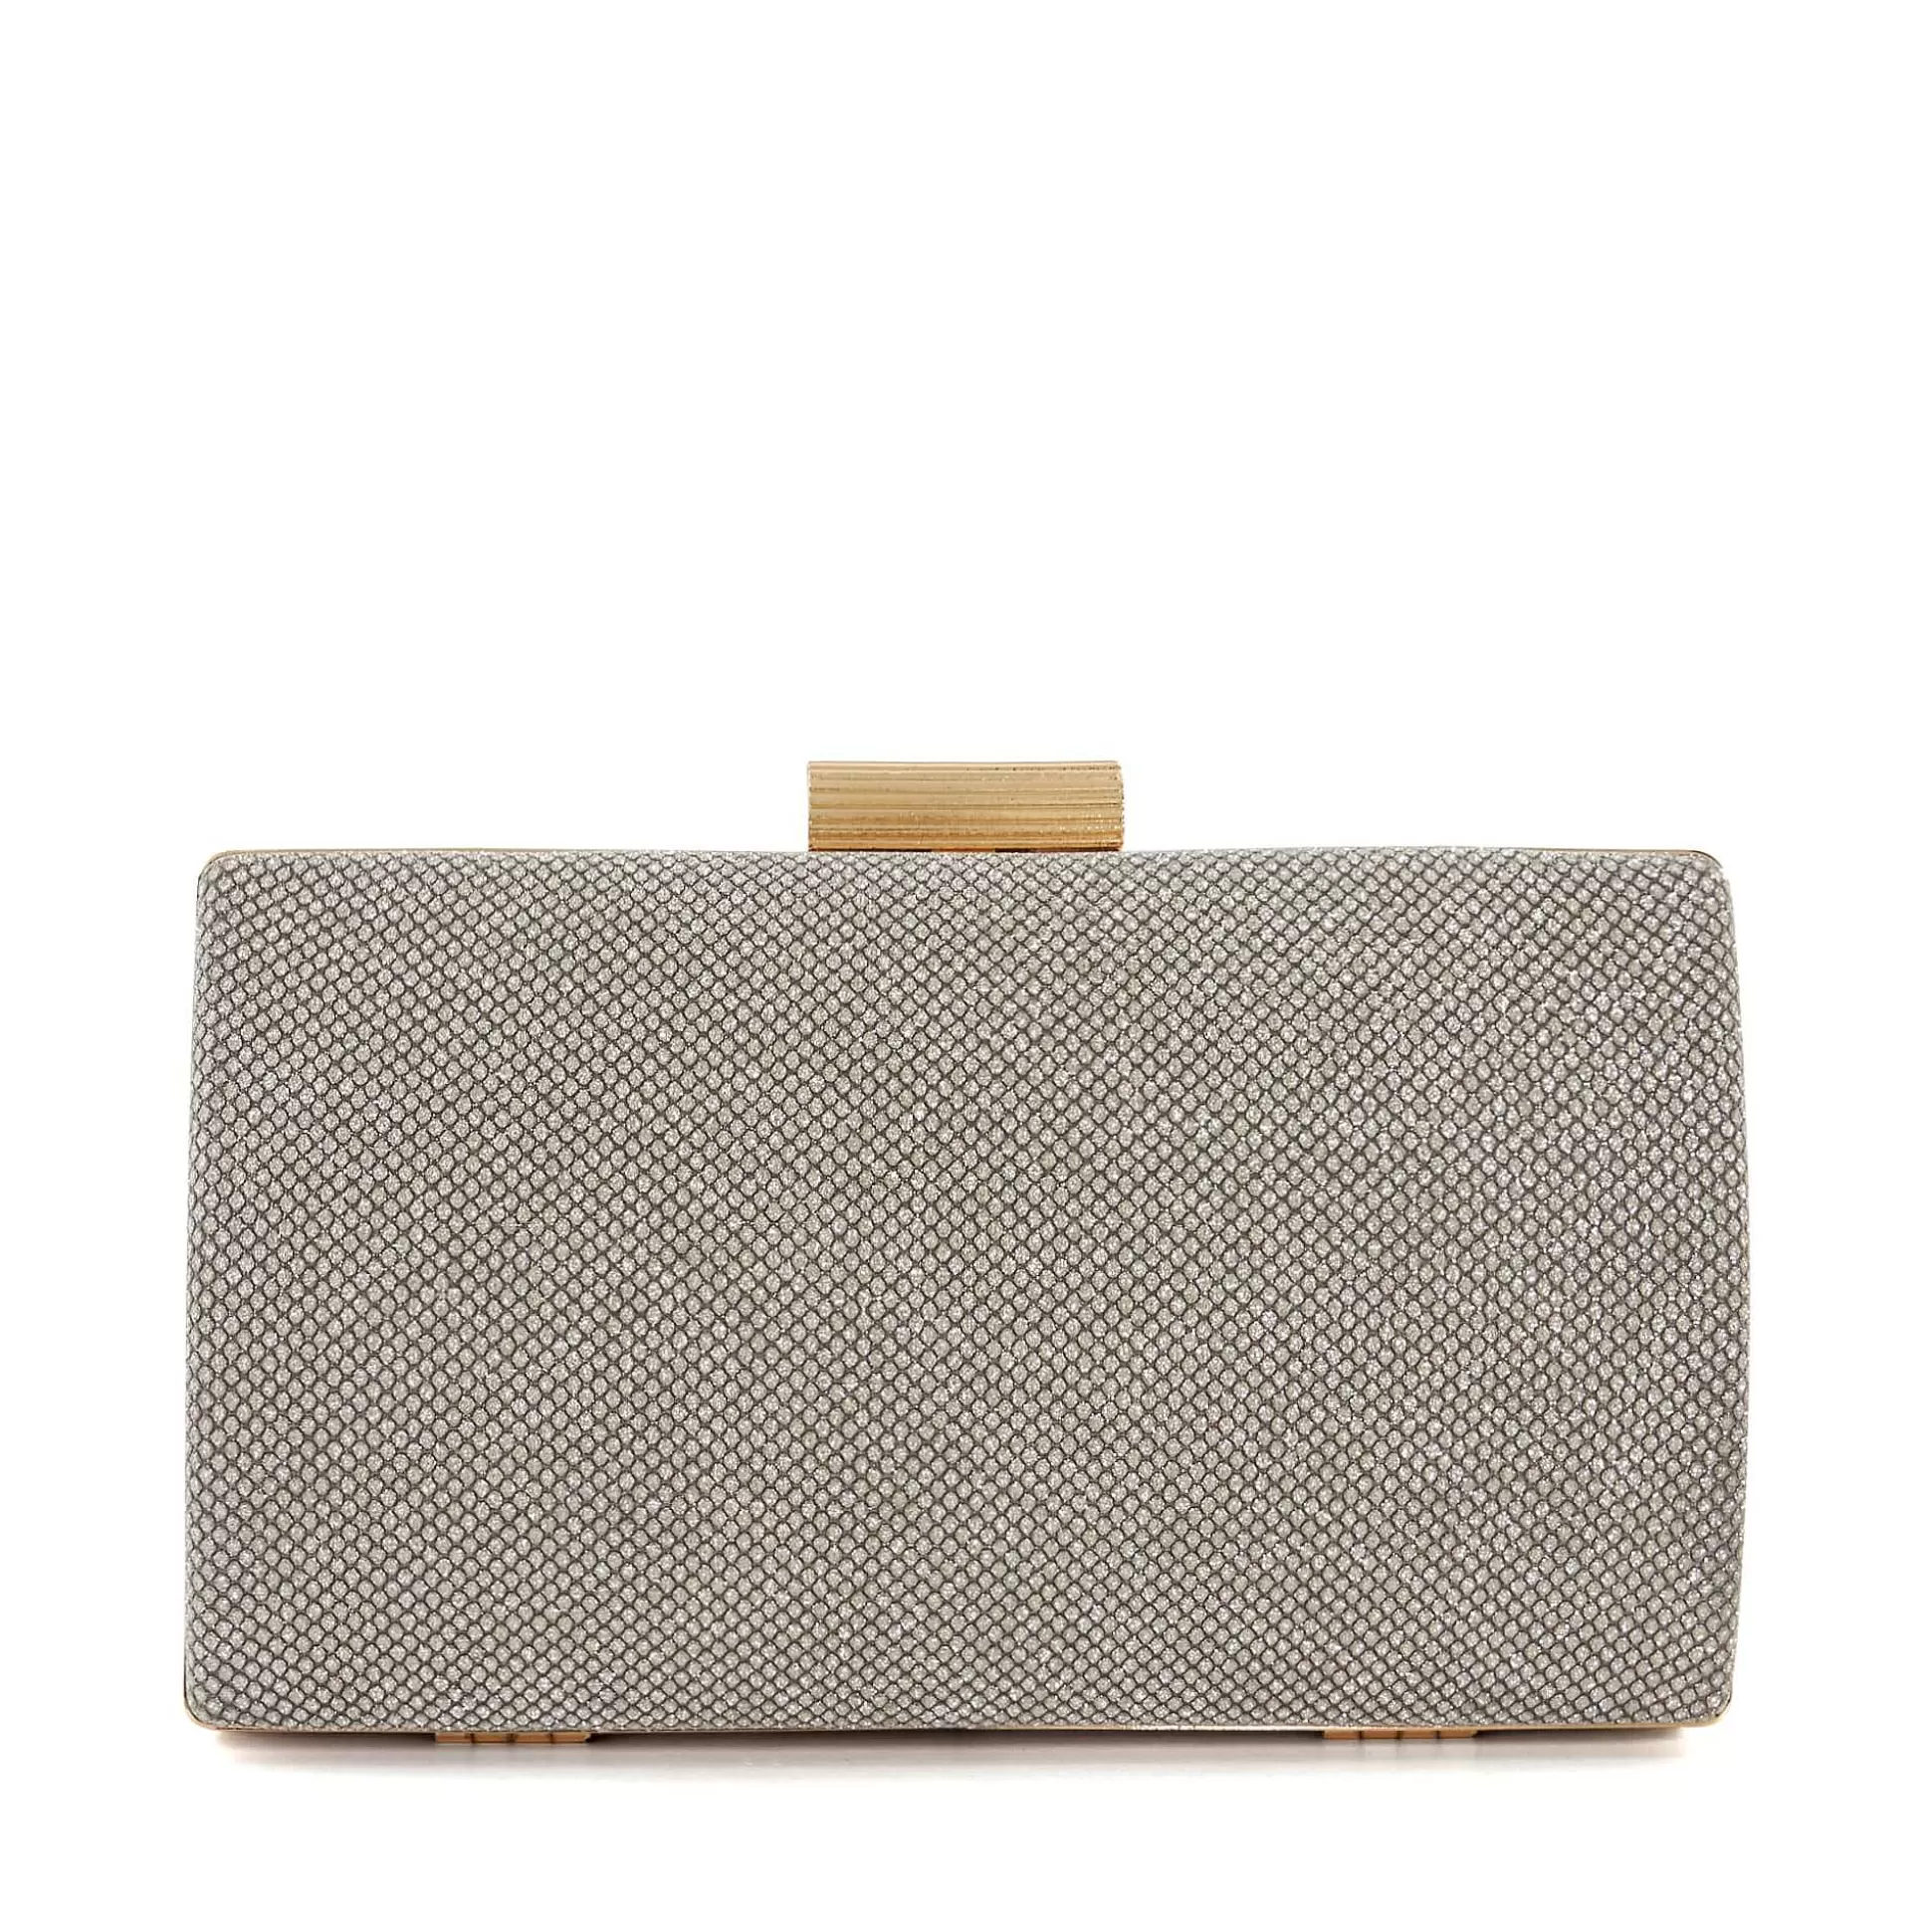 Dune London BELLEVIEW - PEWTER- Clutch Bags